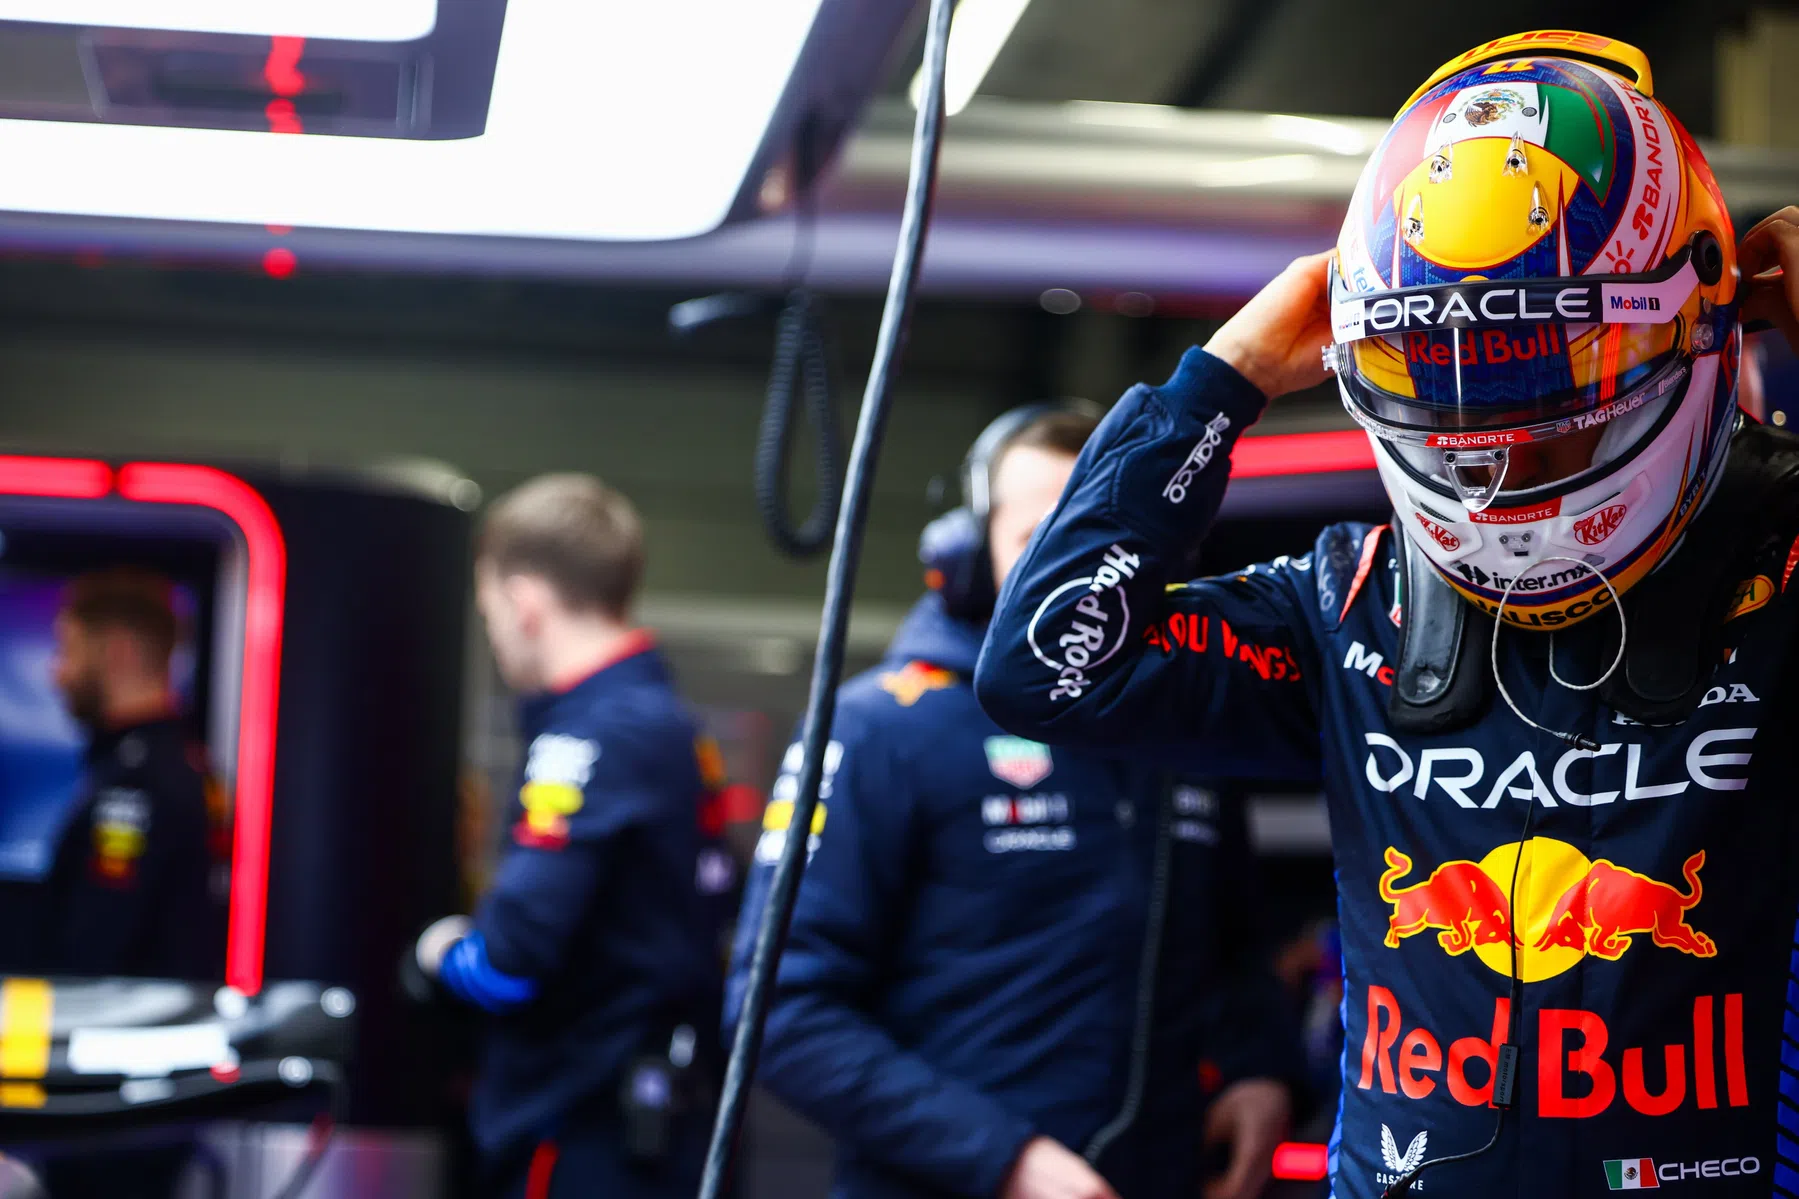 Power Rankings point out Verstappen in seventh place after Monaco GP